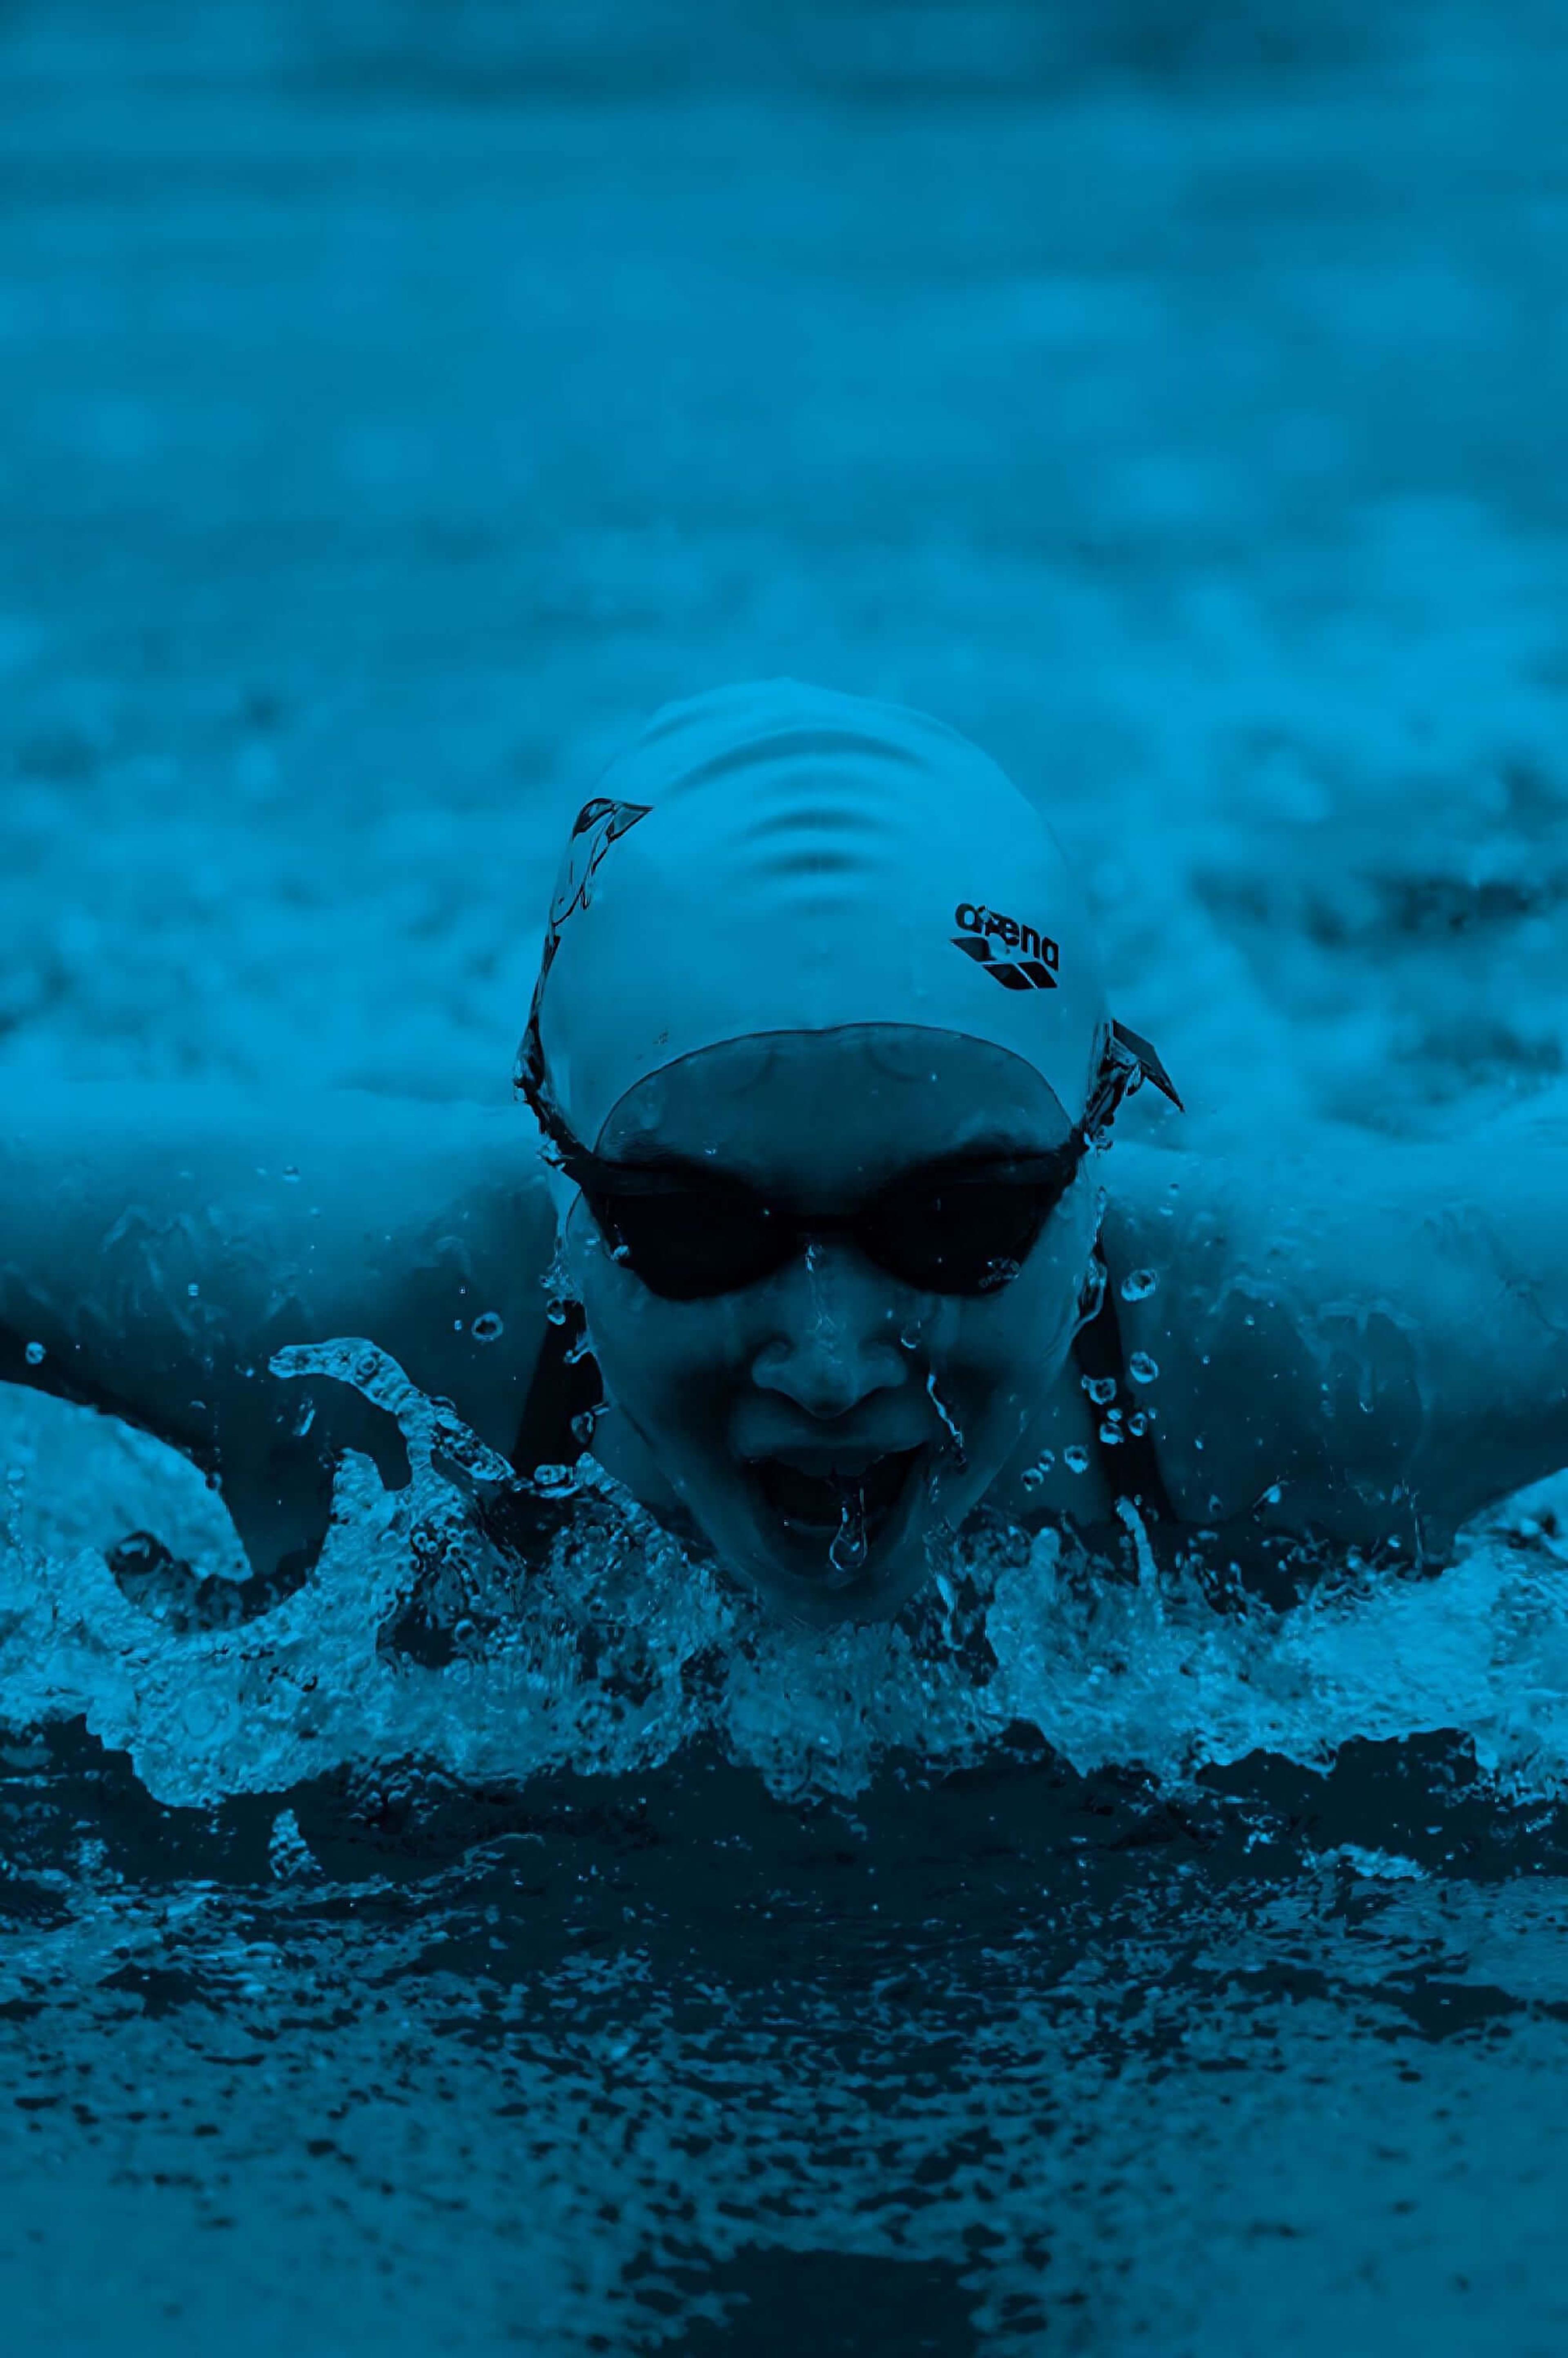 A person swimming, with a blue overlay.